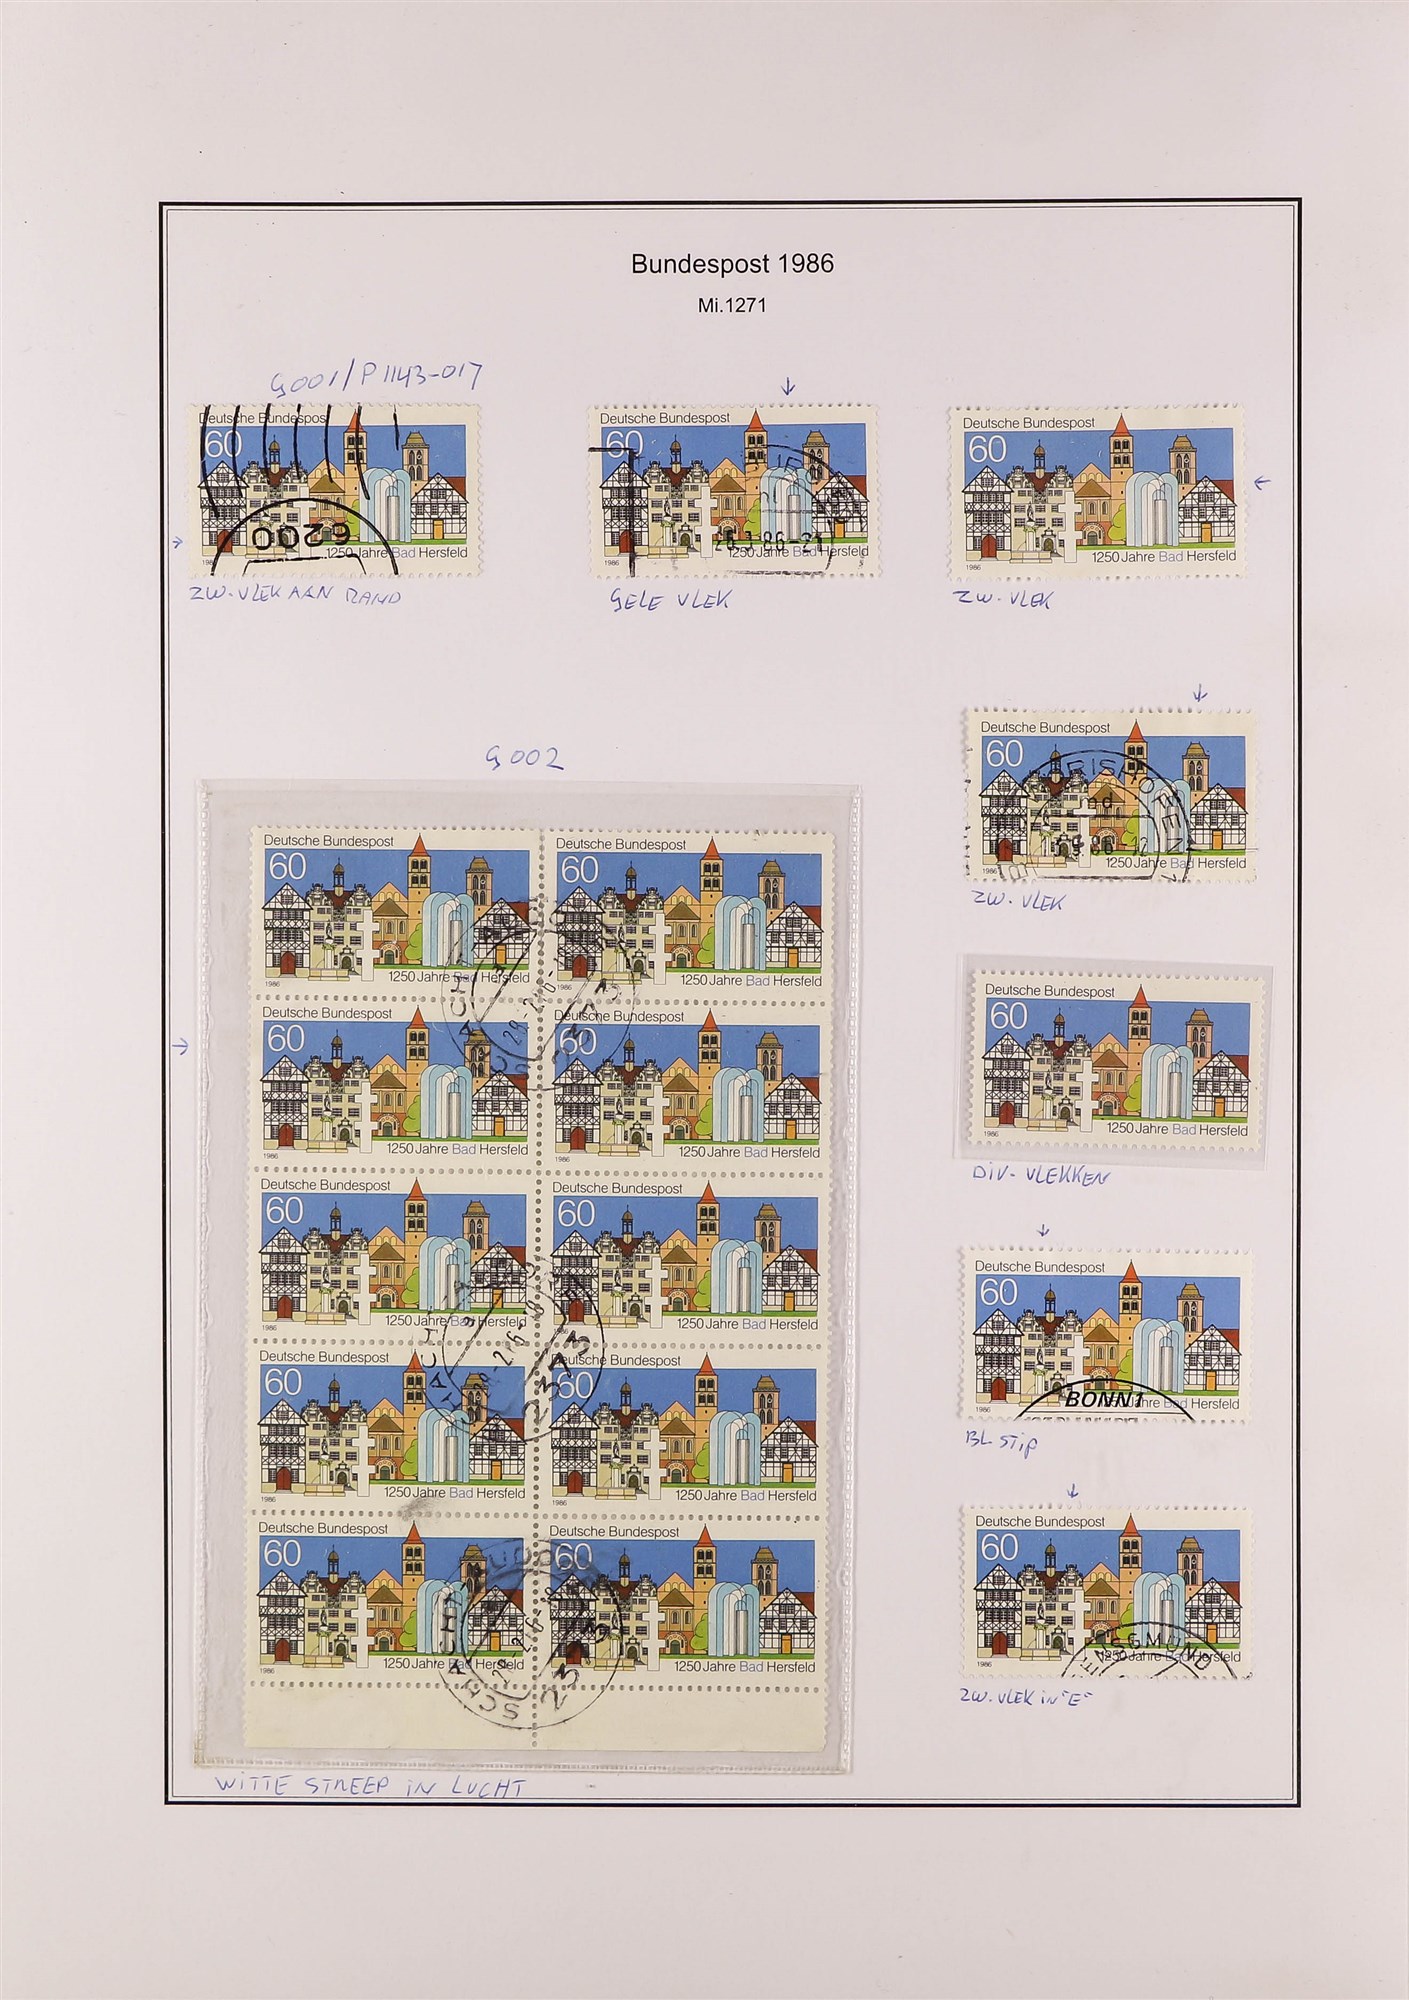 GERMANY WEST 1980 - 1989 SPECIALIZED COLLECTION of 800+ mint, never hinged mint and used stamps,